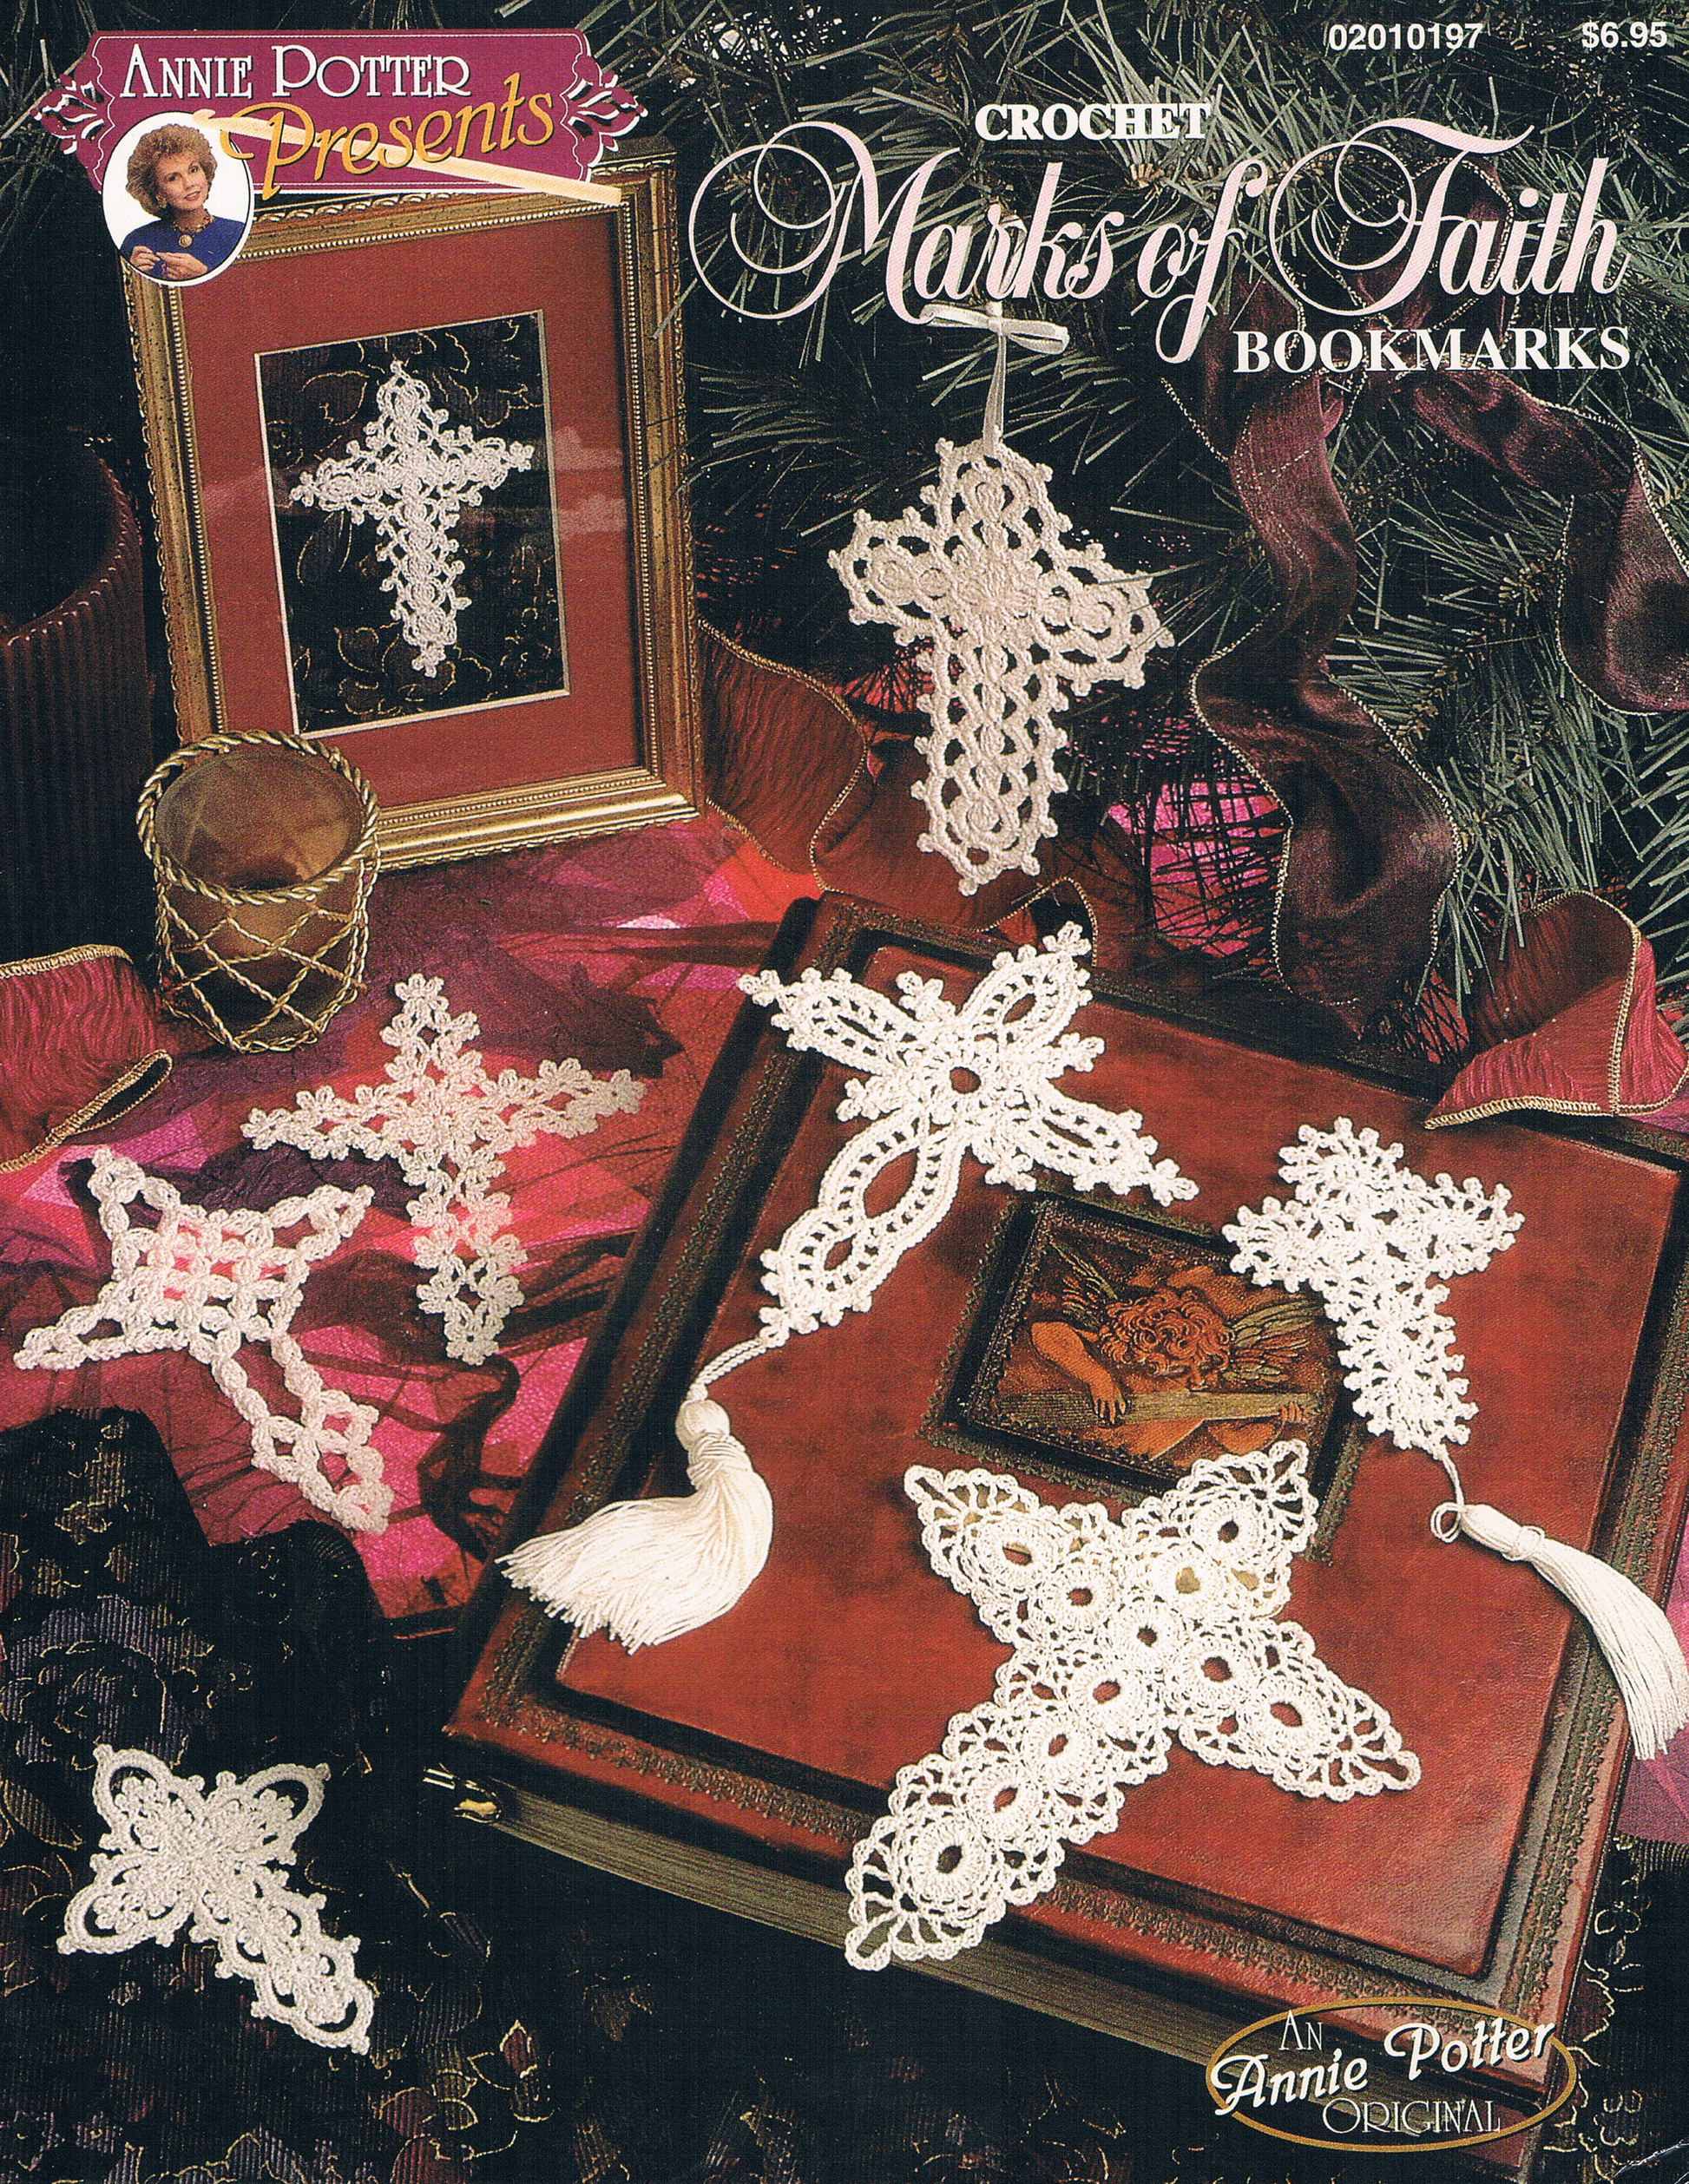 Lace Cross Bookmark Pattern, Marks of Faith, Crocheted Bookmark Crosses, PDF- Annie Potter's Yarn Basket